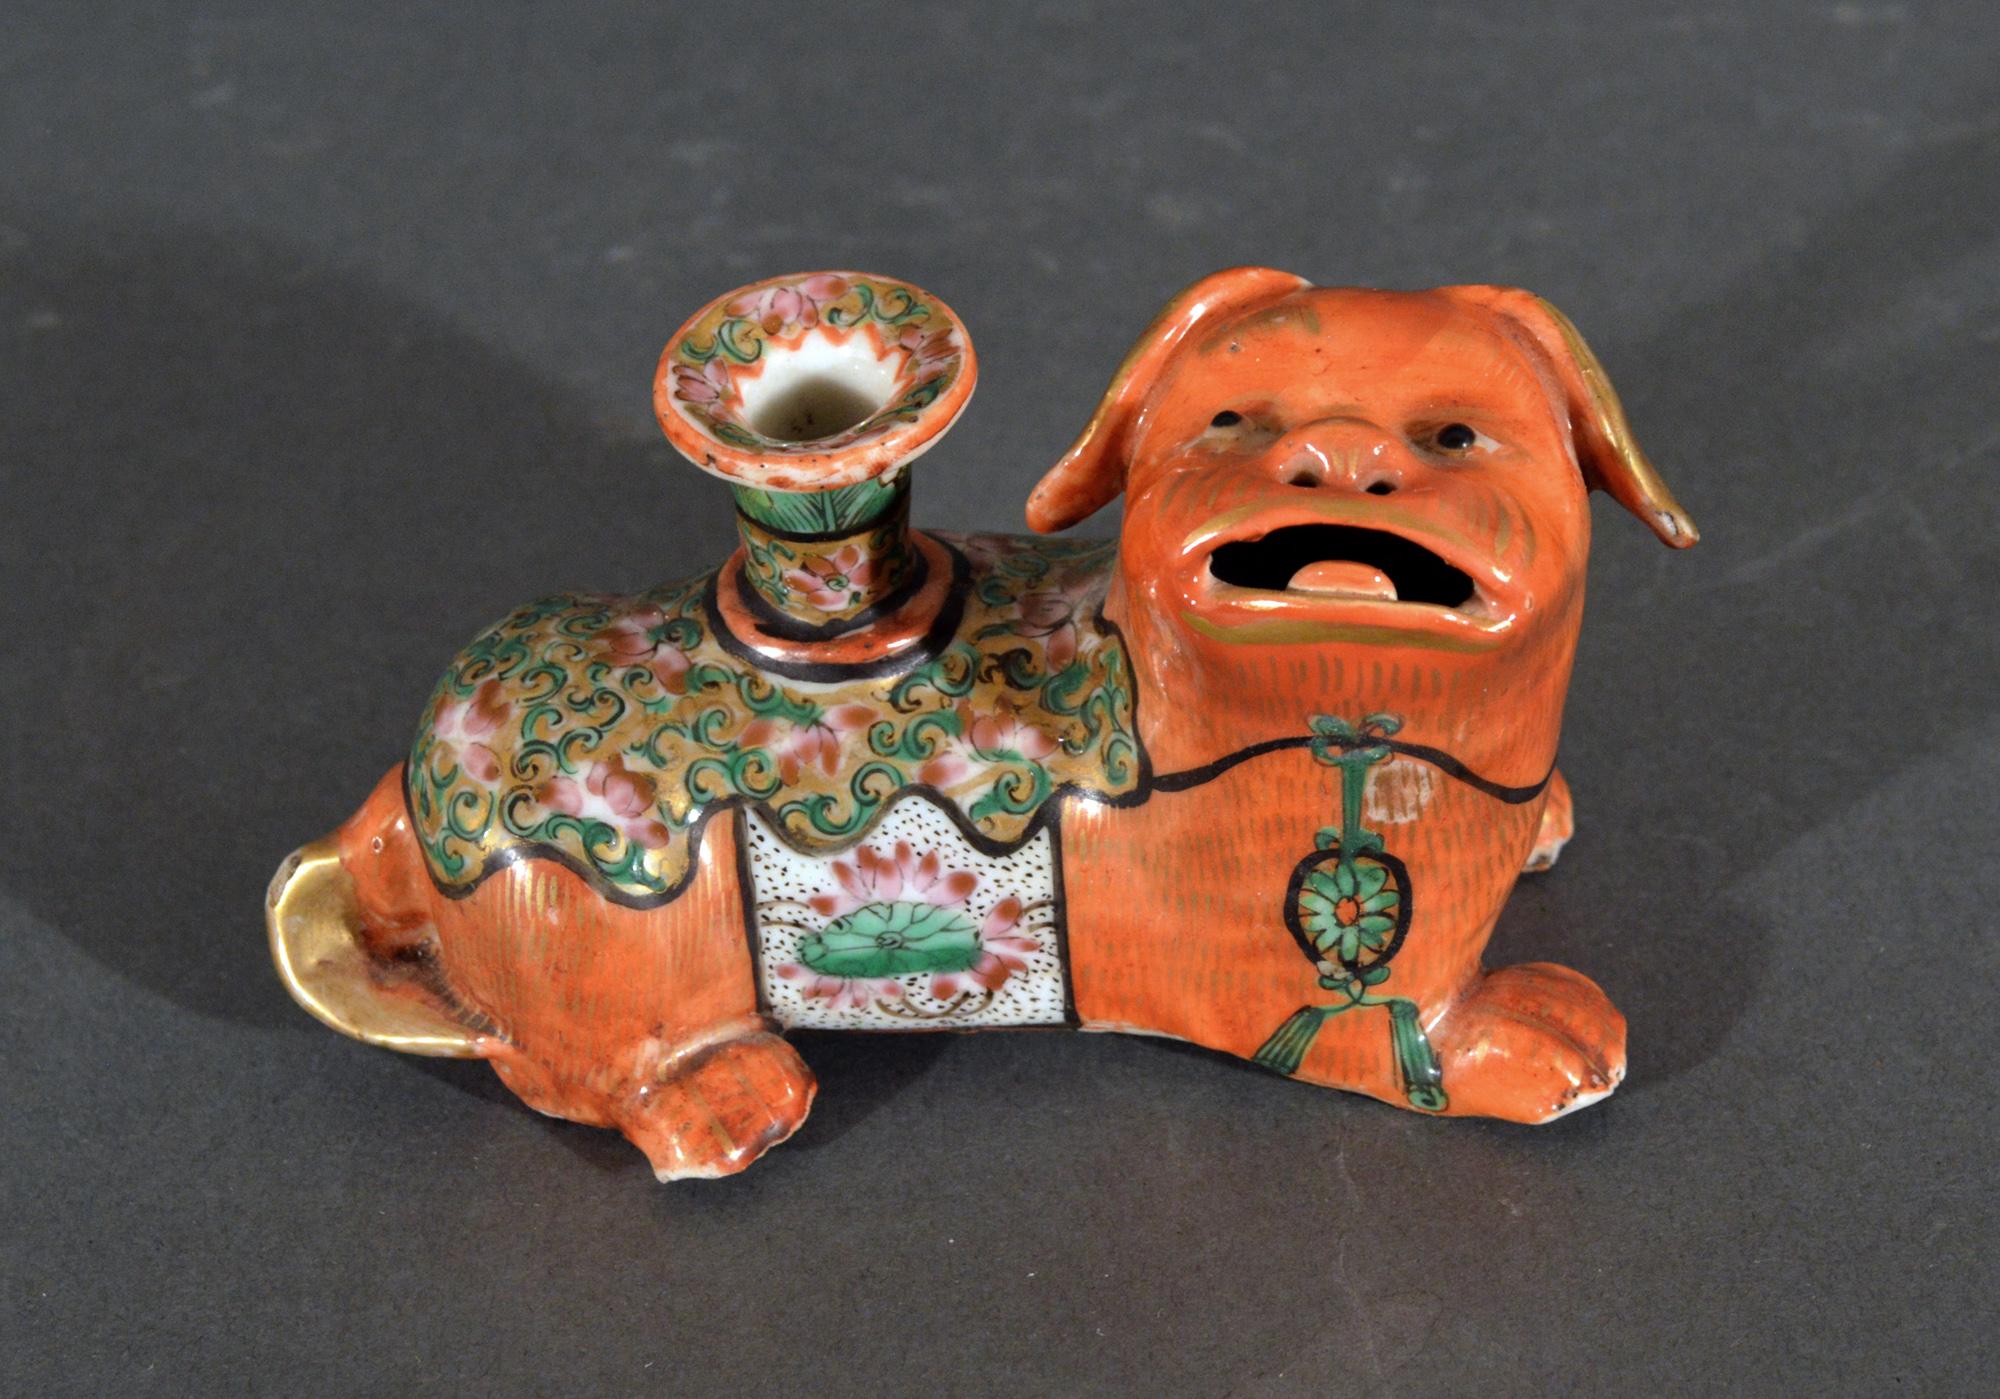 Chinese Export Porcelain foo dog candlesticks
Circa 1860

The Chinese Export porcelain foo dog candlesticks or joss sticks are modeled with the dogs seated on all fours and facing each other with their heads tipped upwards and enameled in an